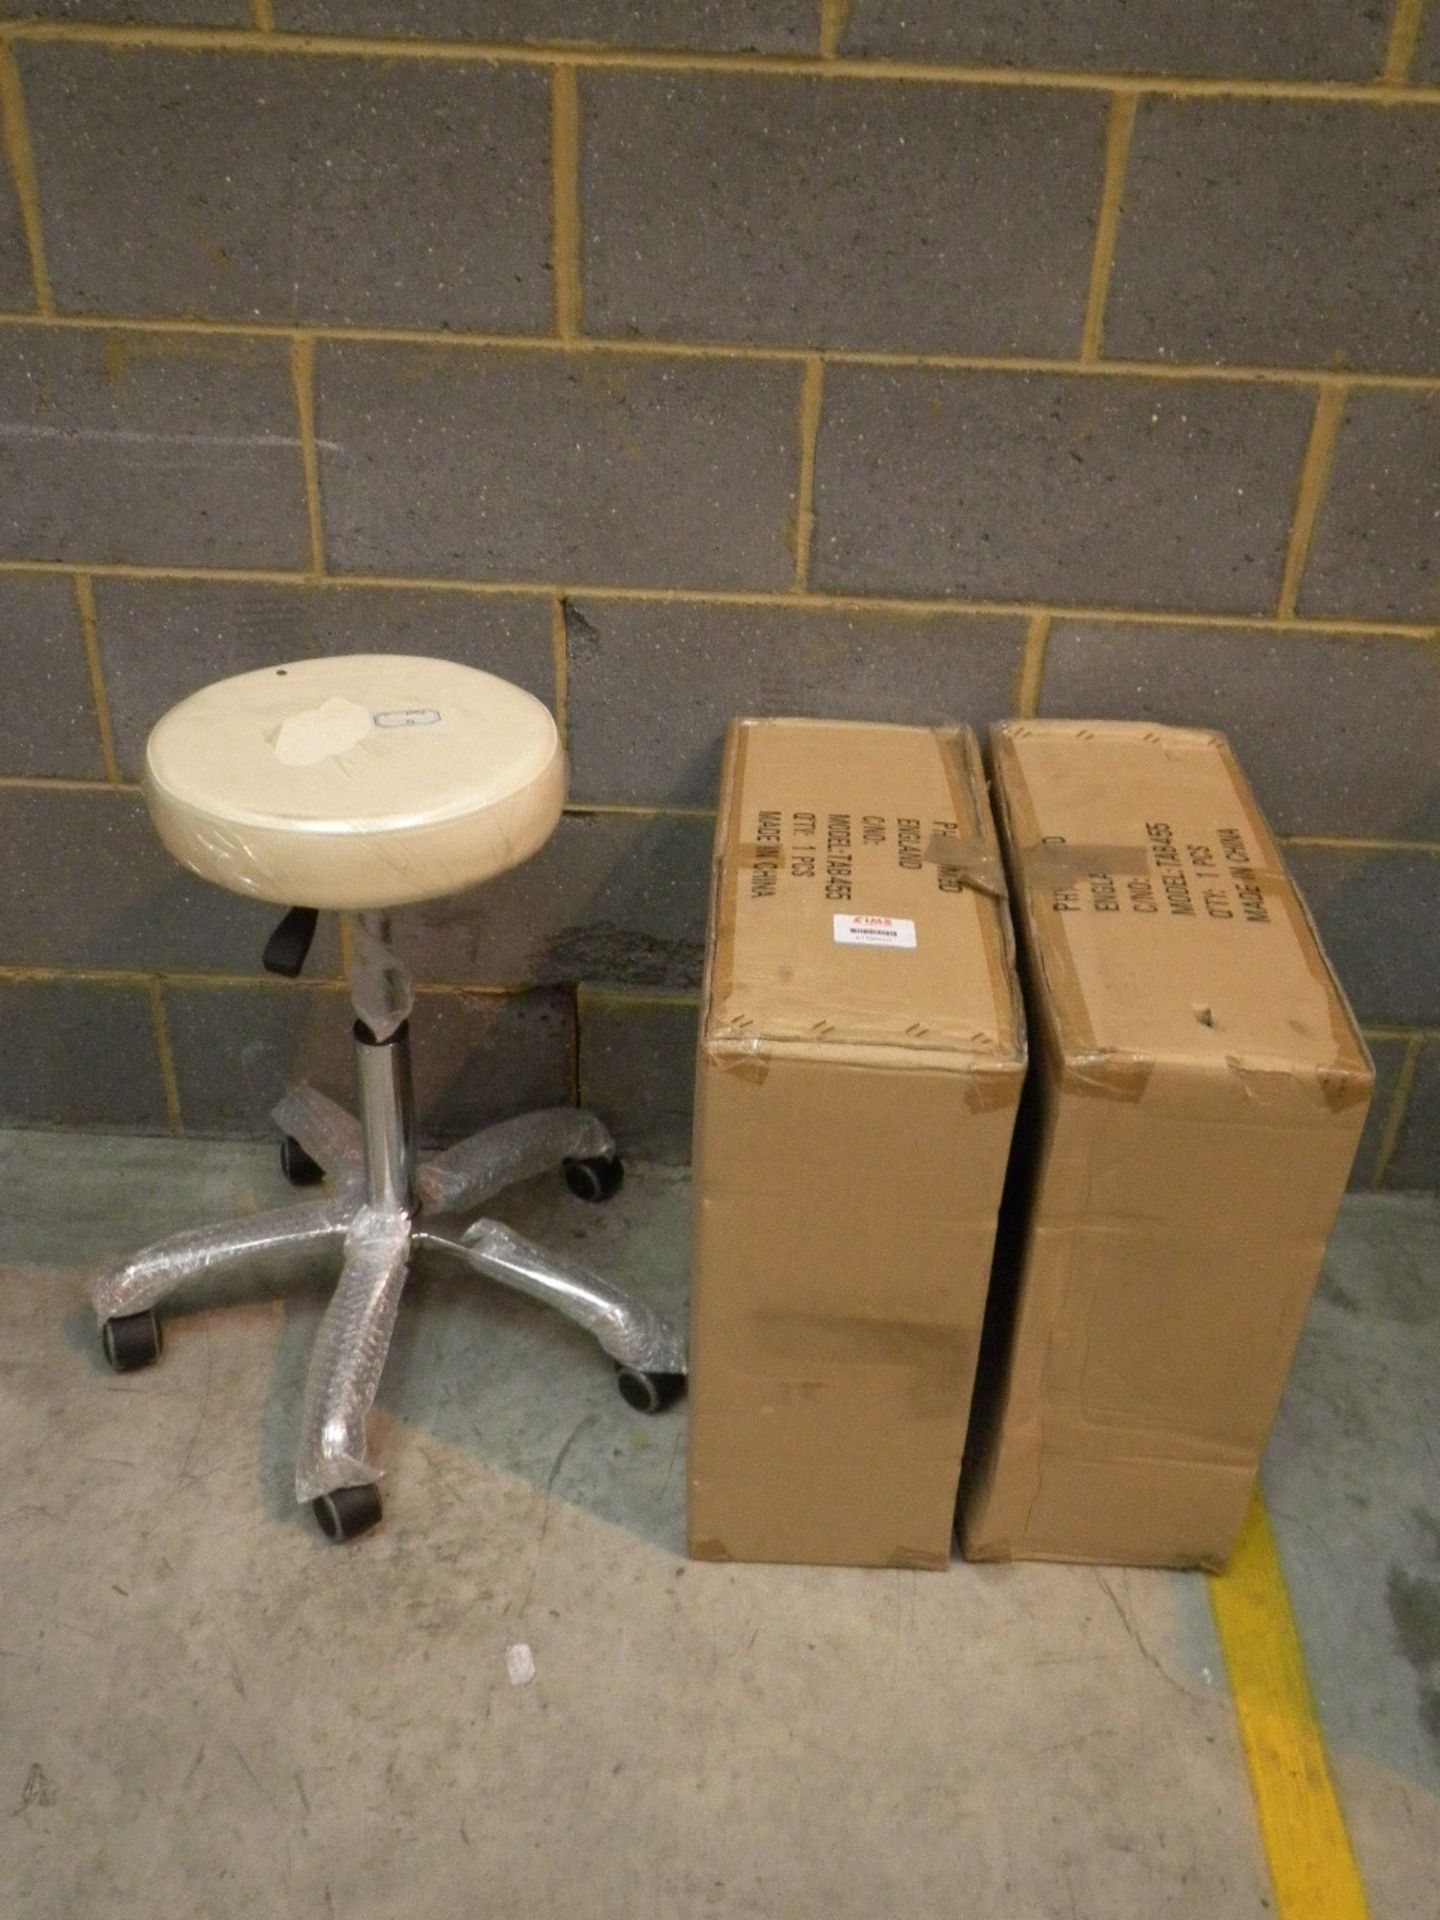 2x Physio Med Round Top Medical Stools Model TAB 455 Brand New In Box